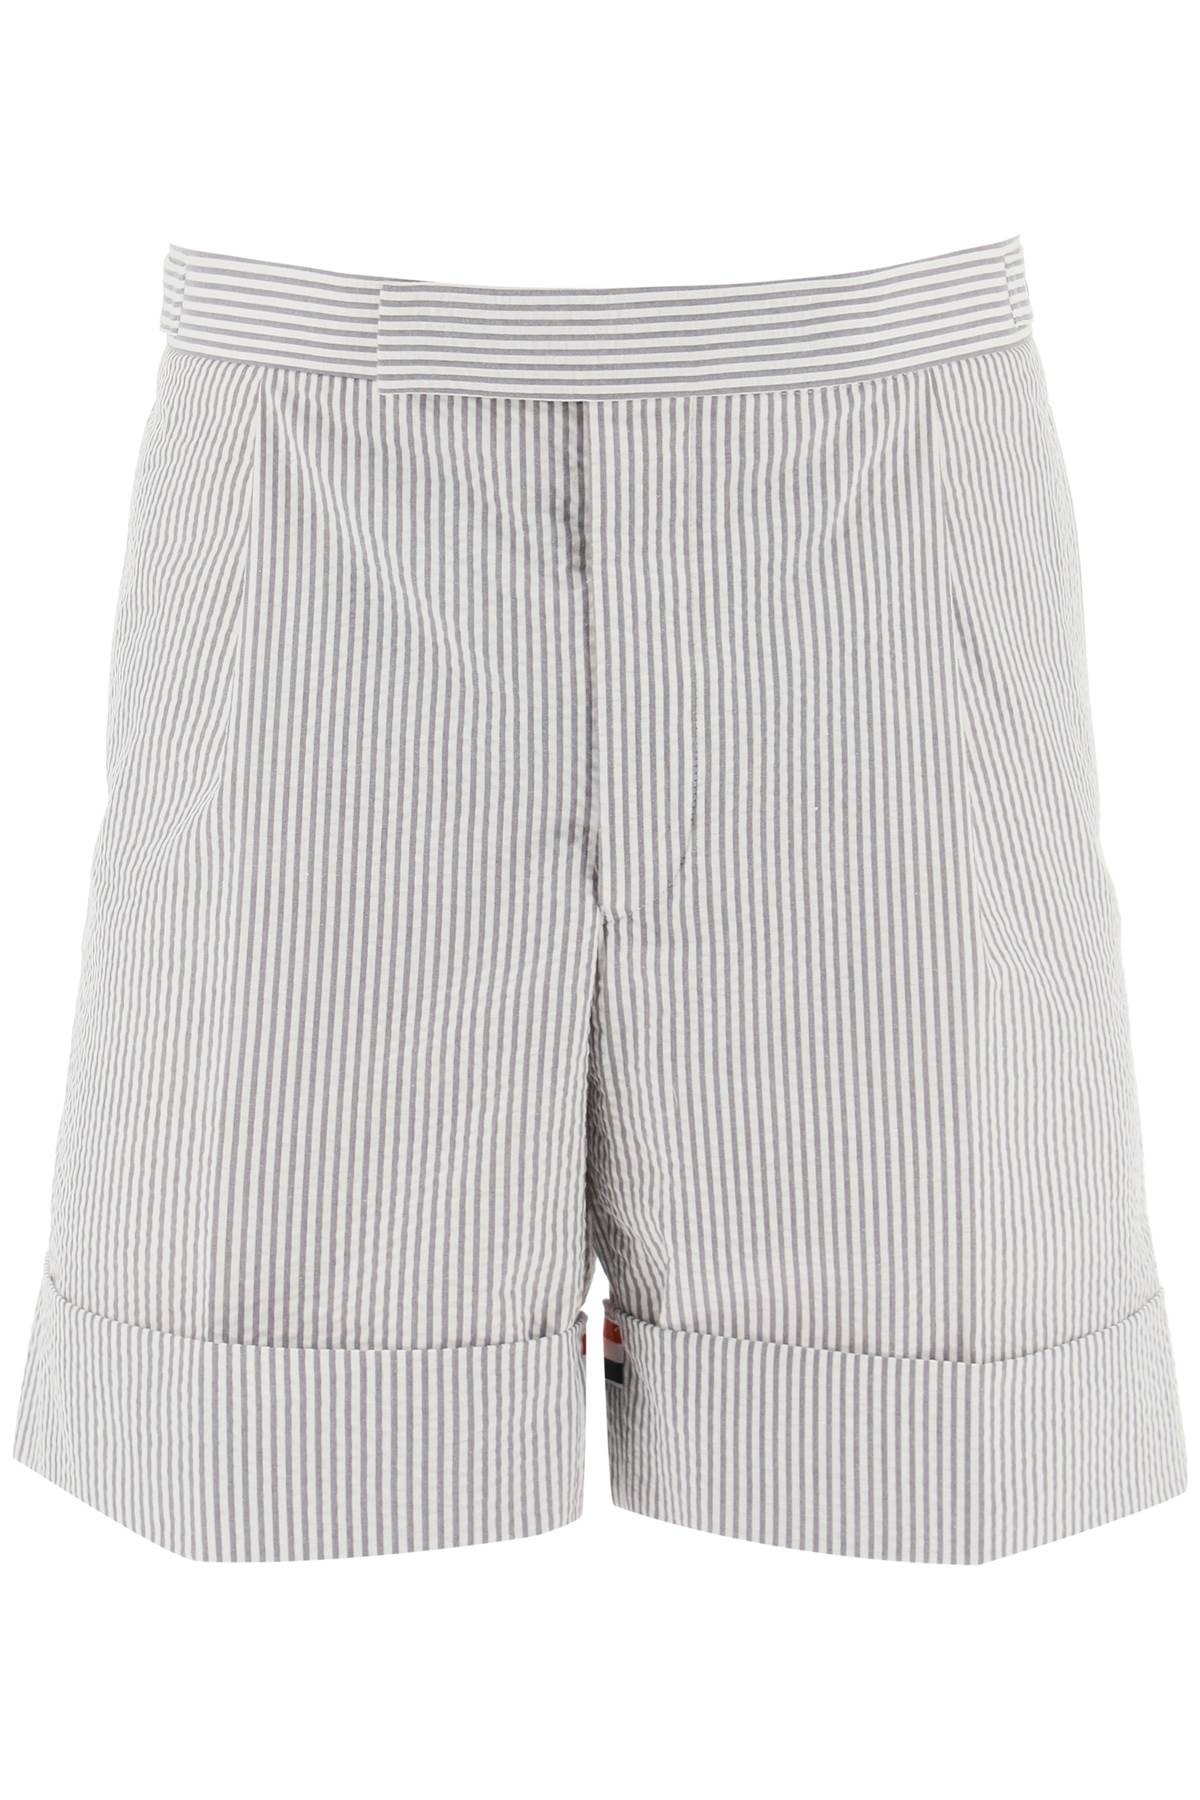 Striped Shorts With Tricolor Details - 1